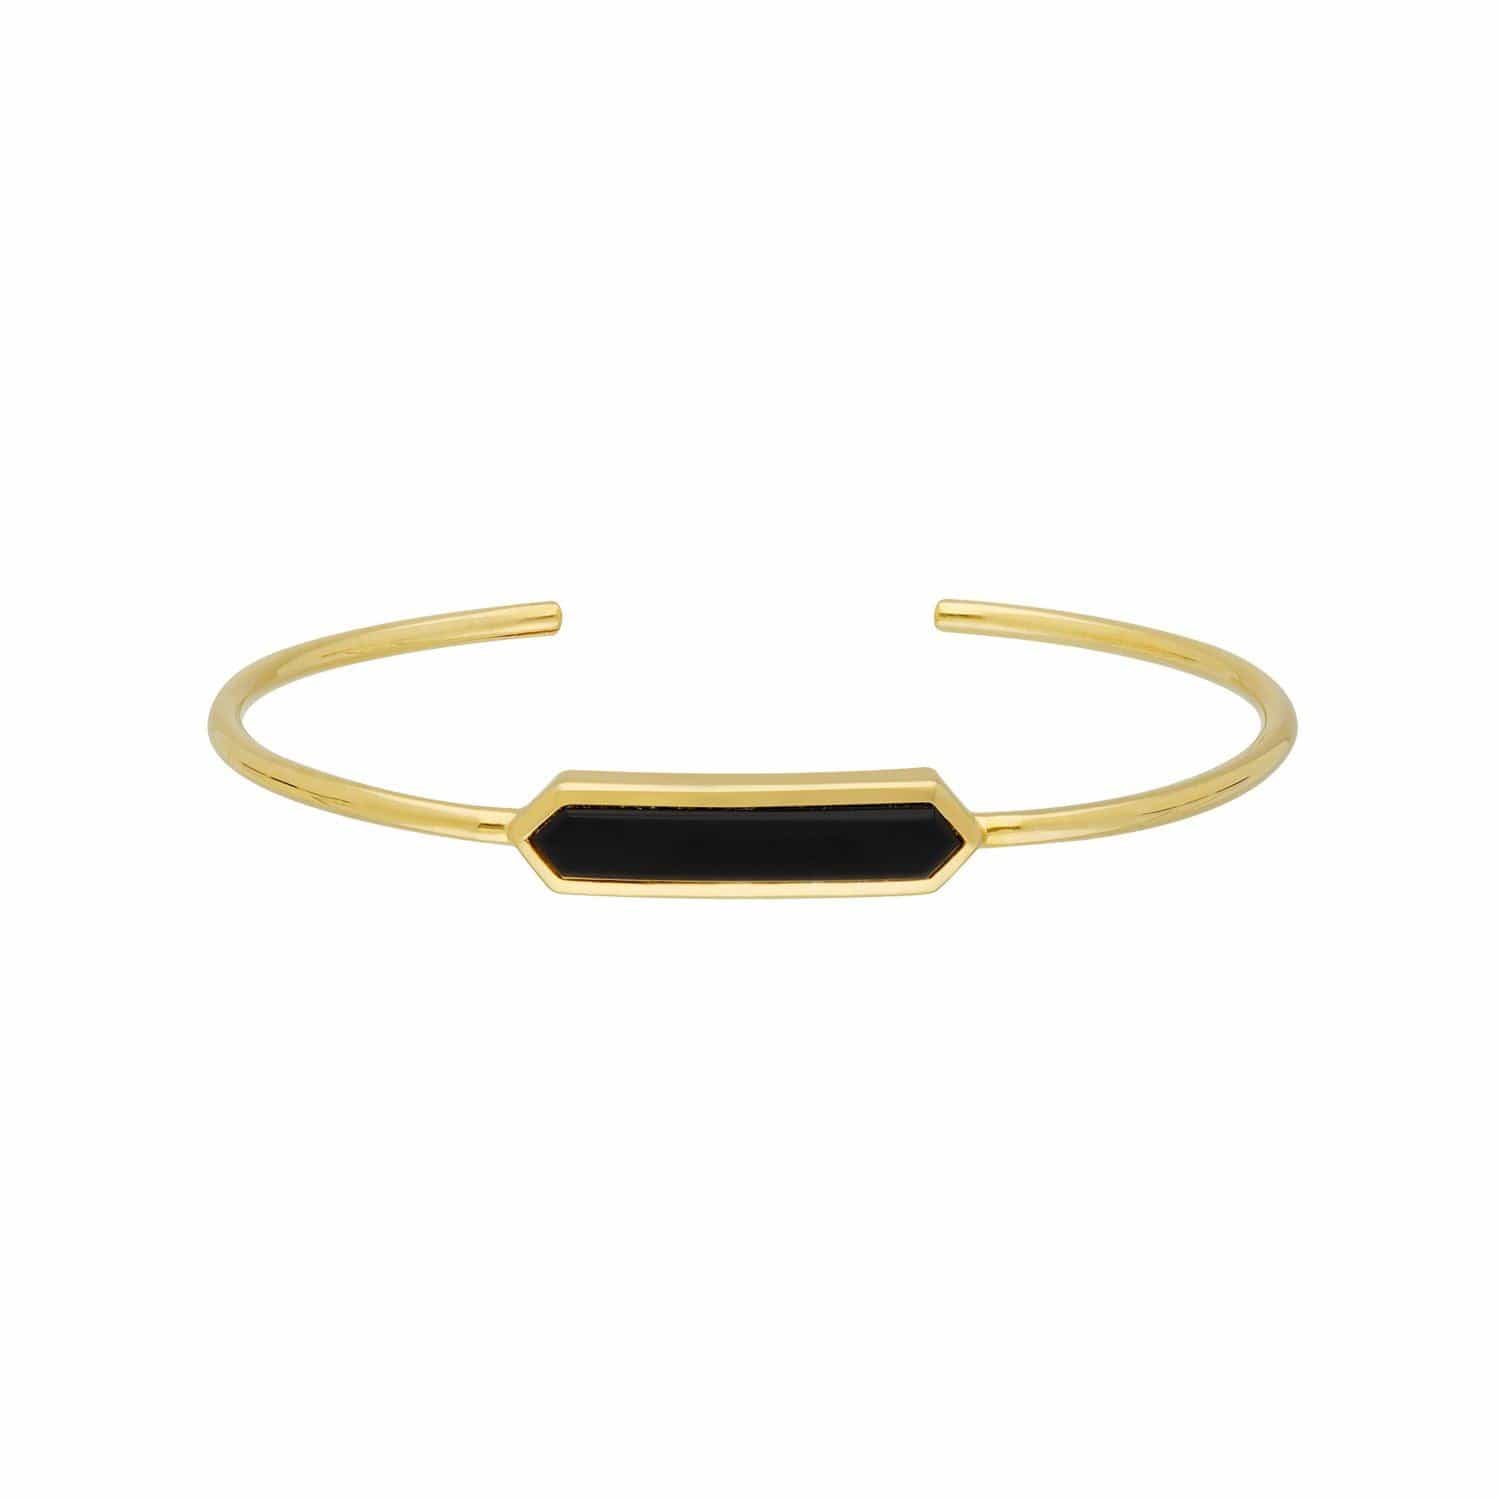 Geometric Prism Black Onyx Bangle in Gold Plated Sterling Silver